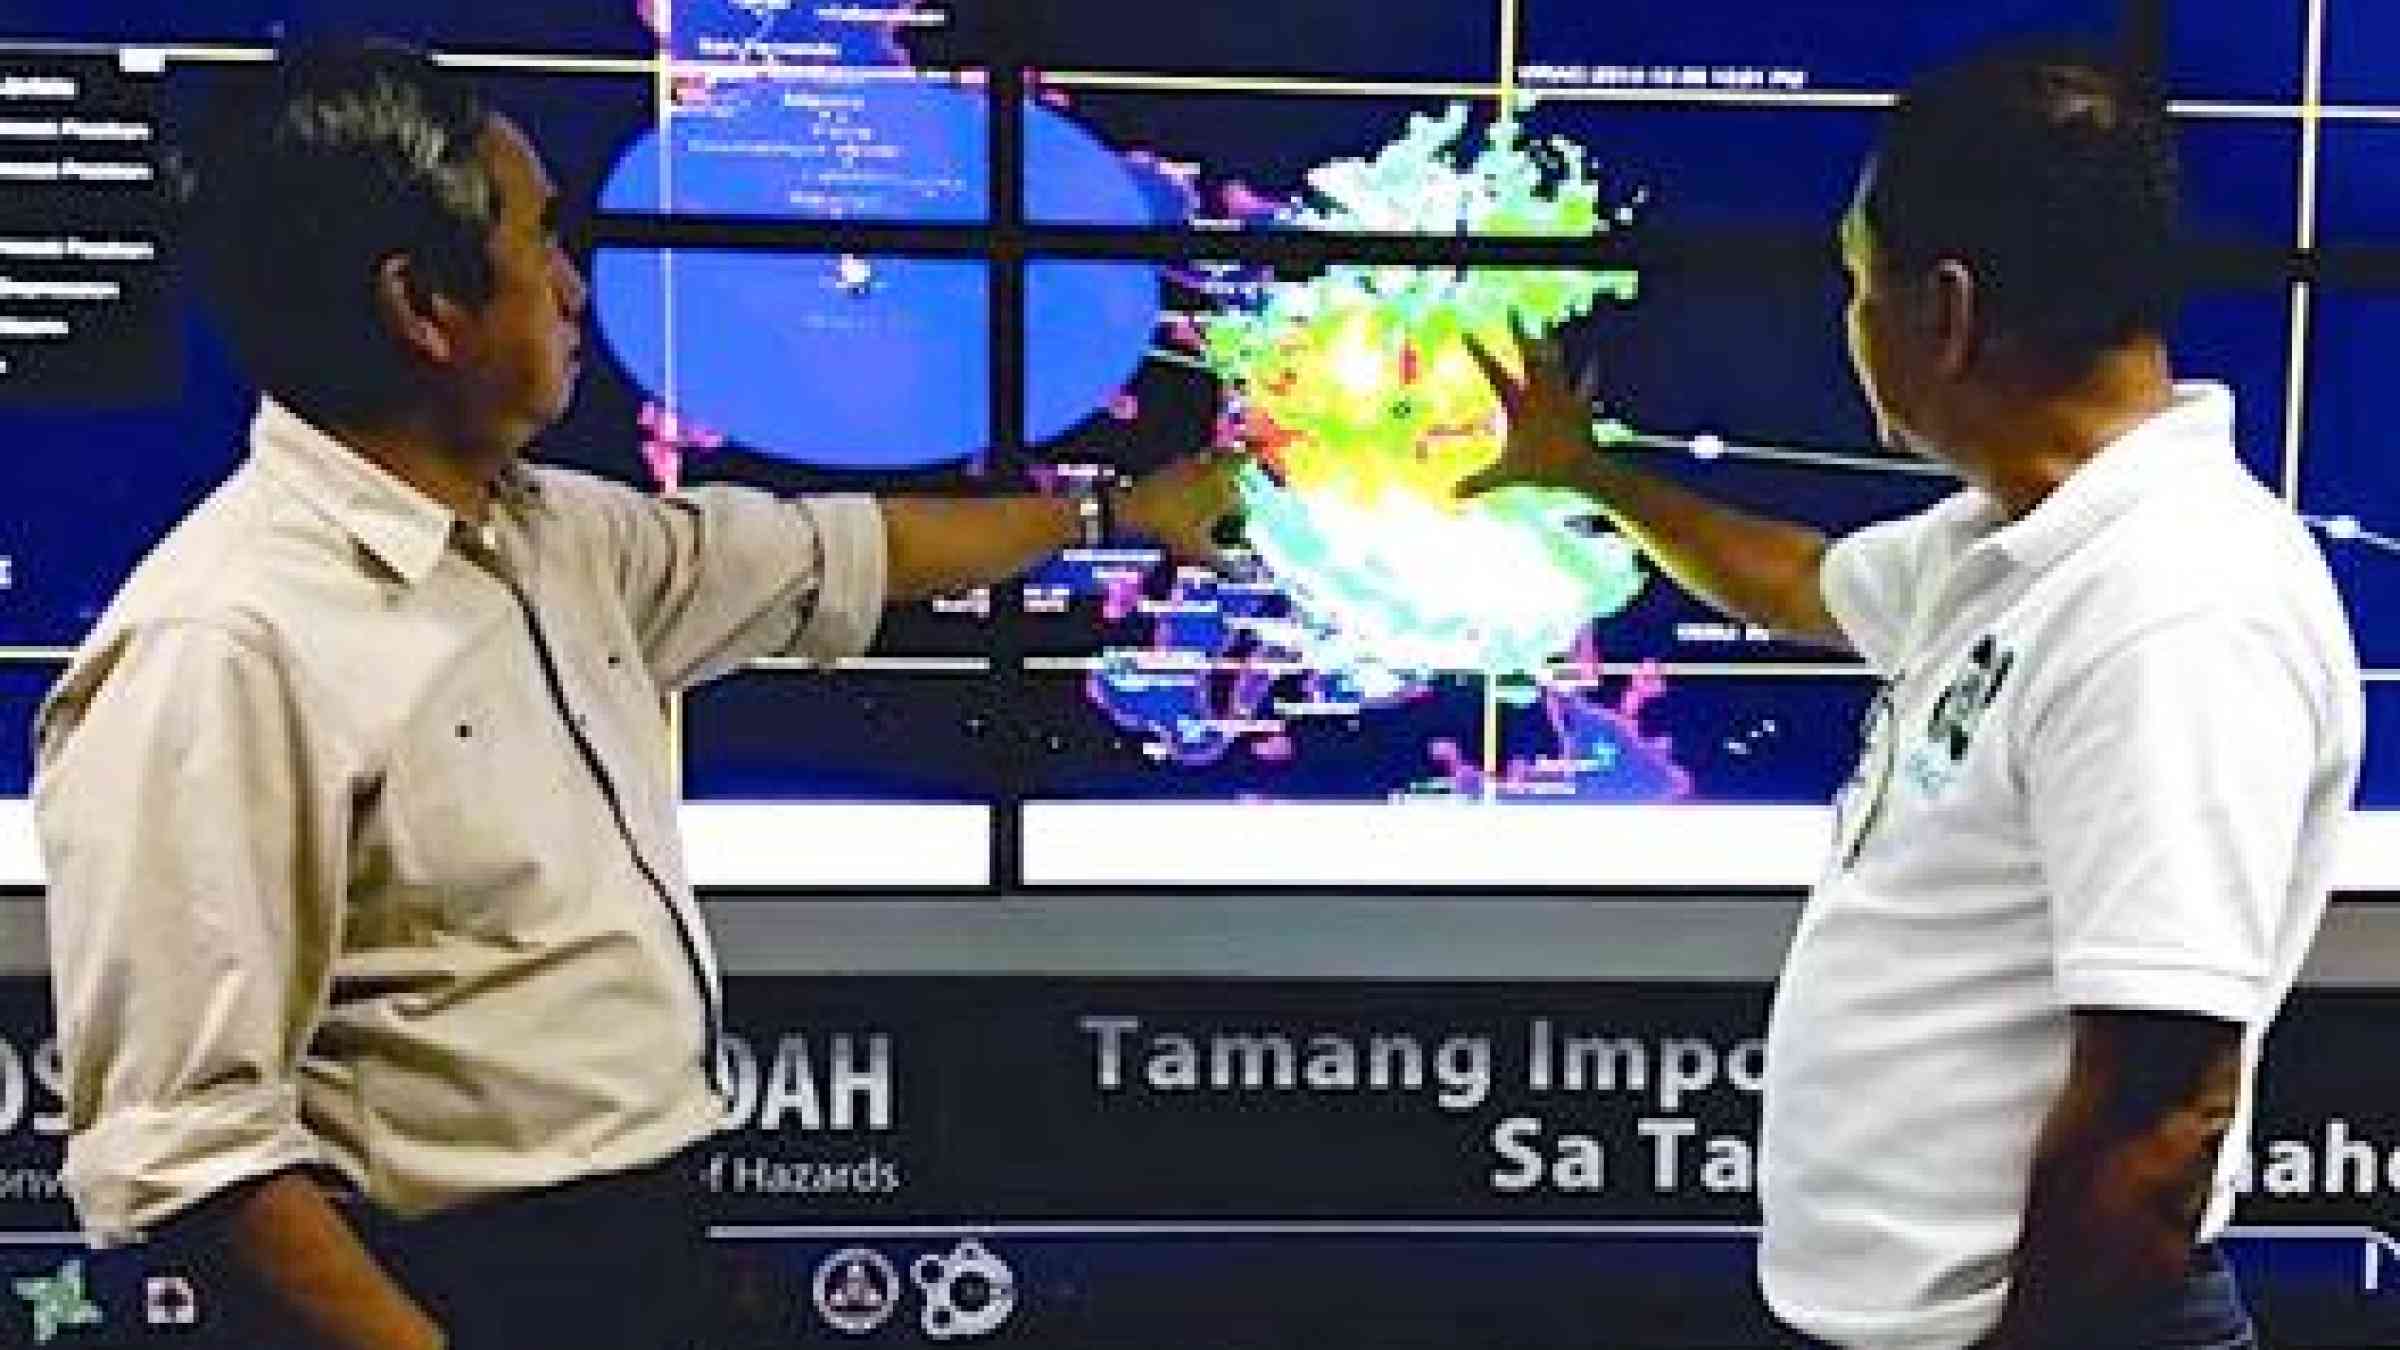 Alexander Pama (left), Executive Director of the Philippines' National Disaster Risk Reduction and Management Council, receives a briefing from a local meteorologist on the expected movement of Typhoon Hagupit. (Photo: Kenly Monteagudo)